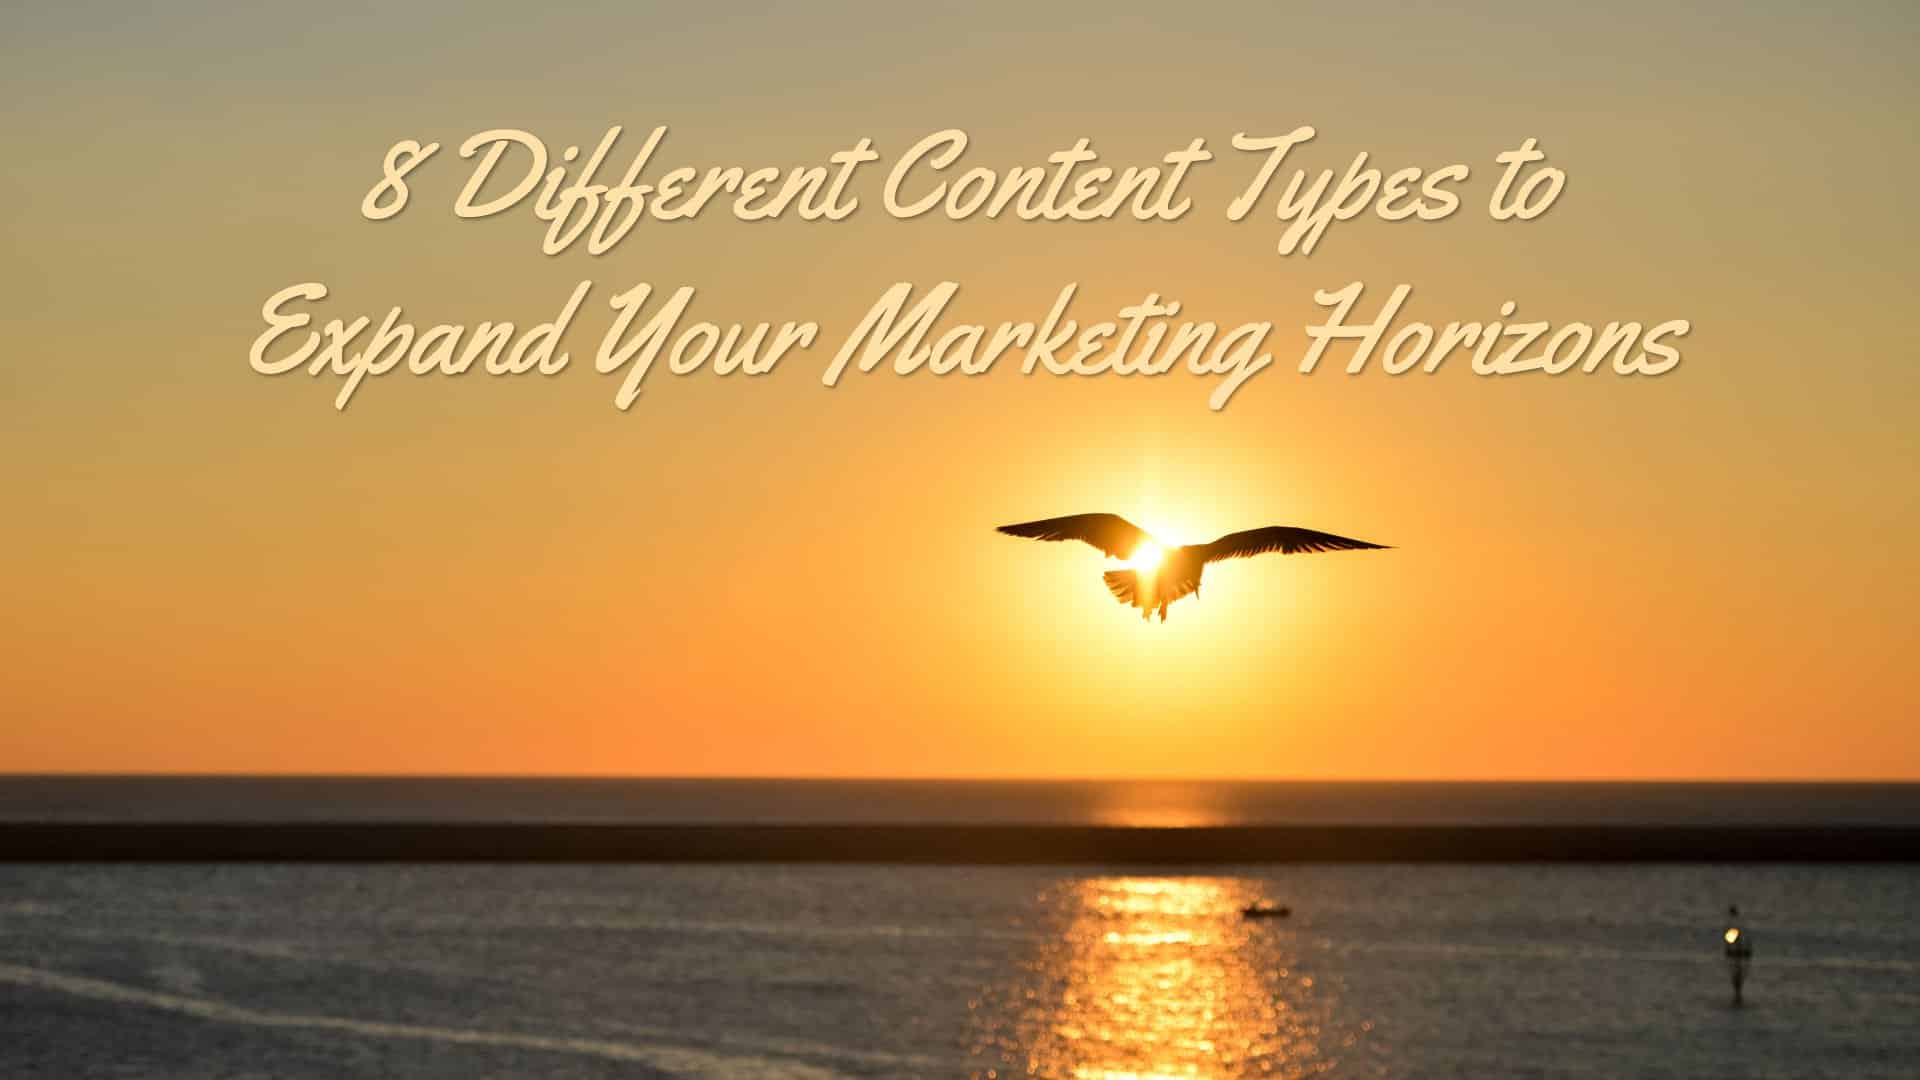 8 Content Types to Expand Your Marketing Horizons